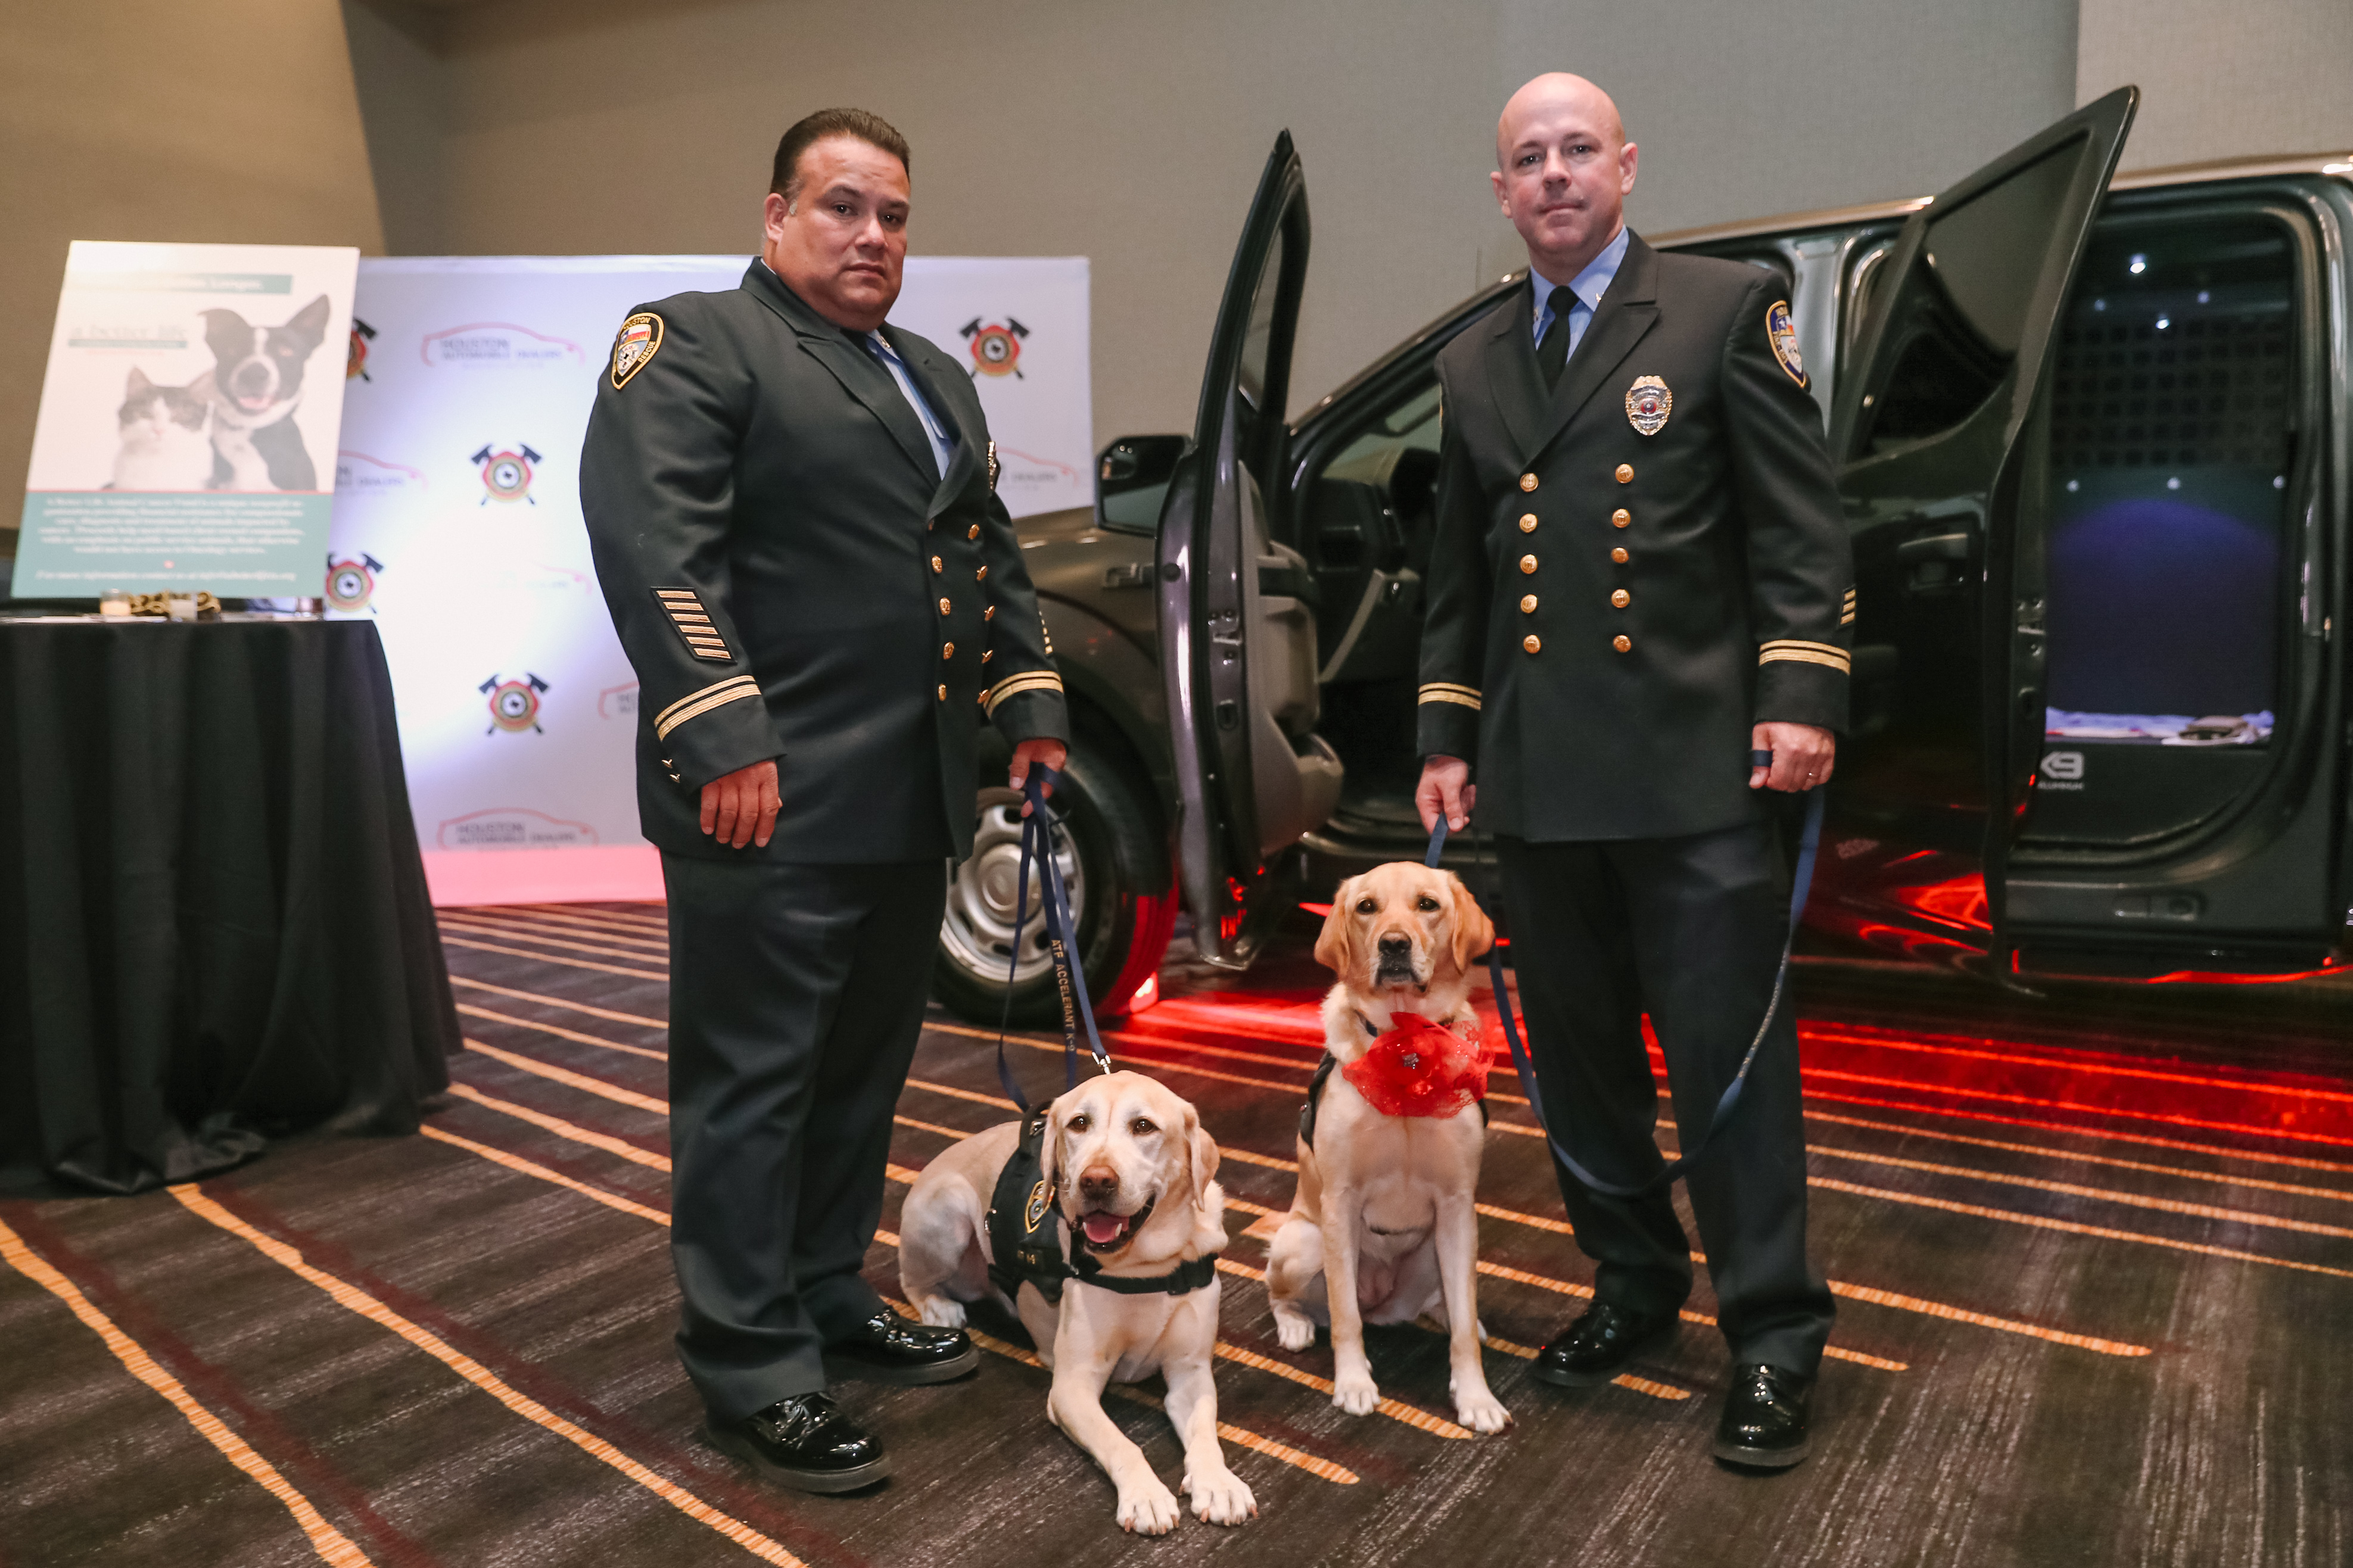 Houston Firefighters delight at Red Hot Gala